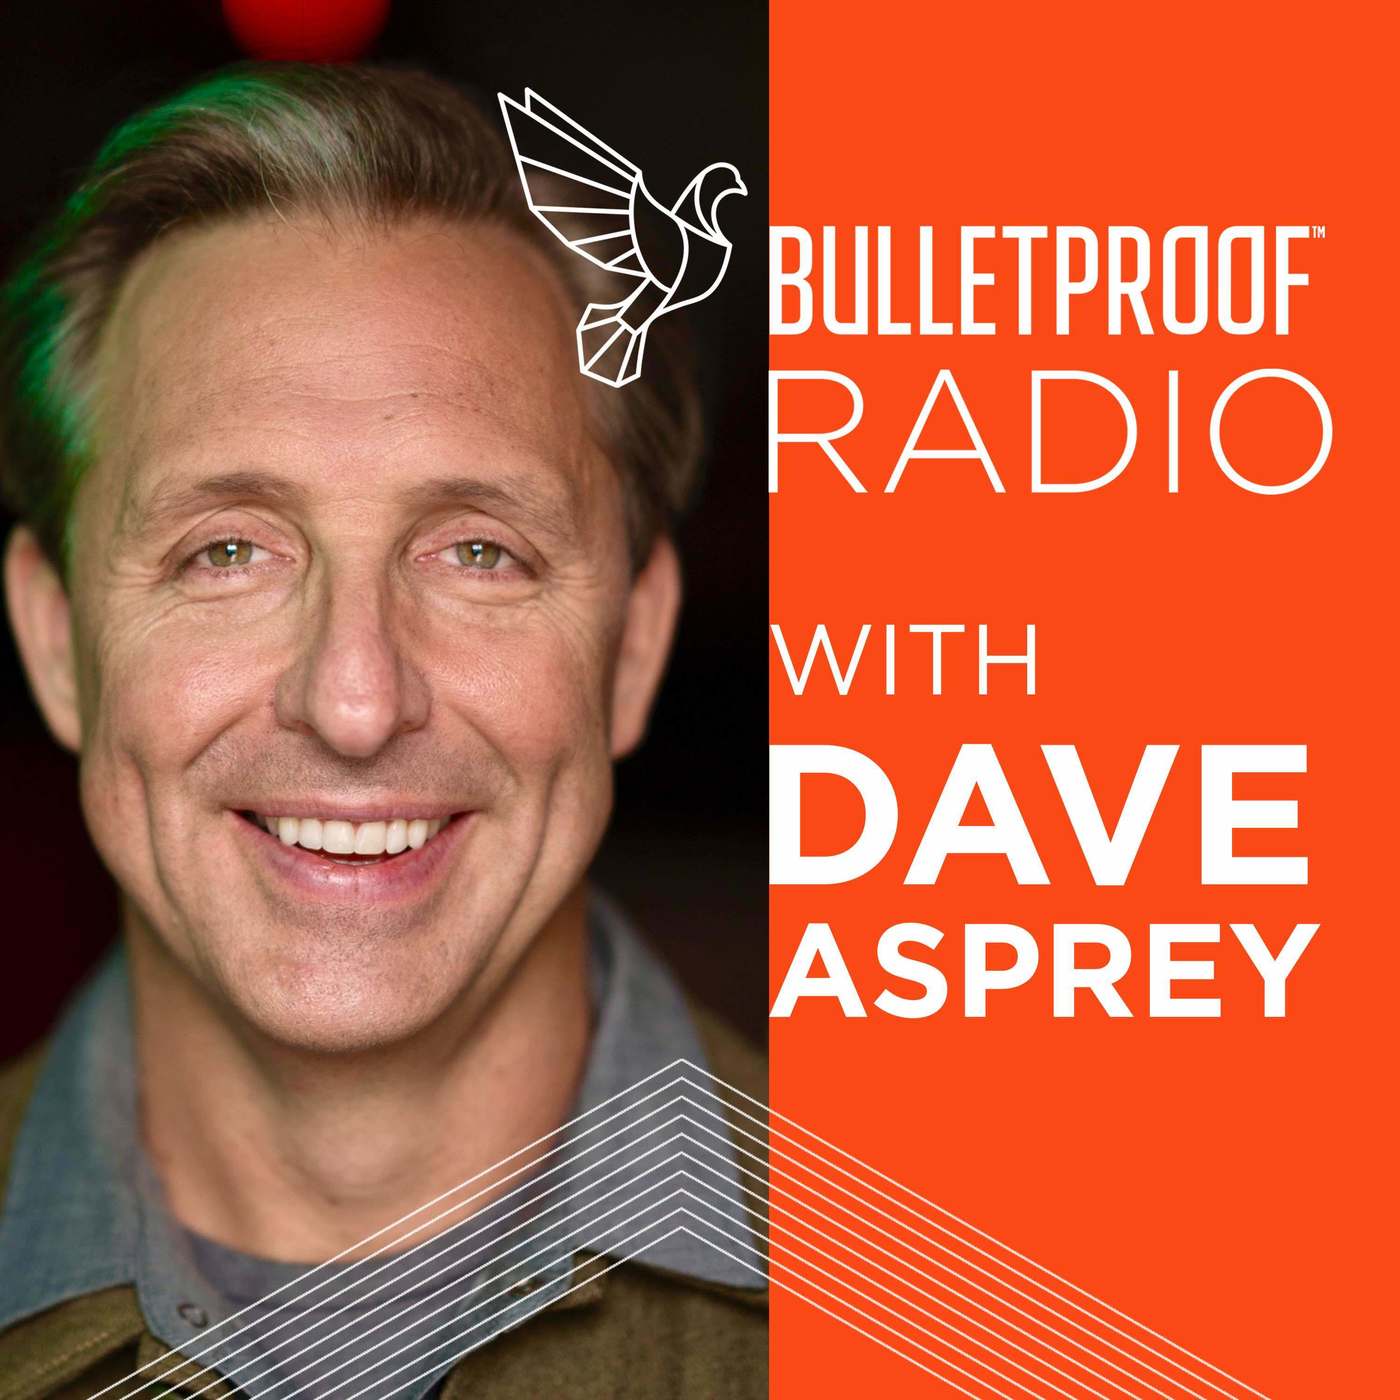 Surprise Guest! Tiffany Haddish Tells Dave Asprey Her Shelter-in-Place Secrets